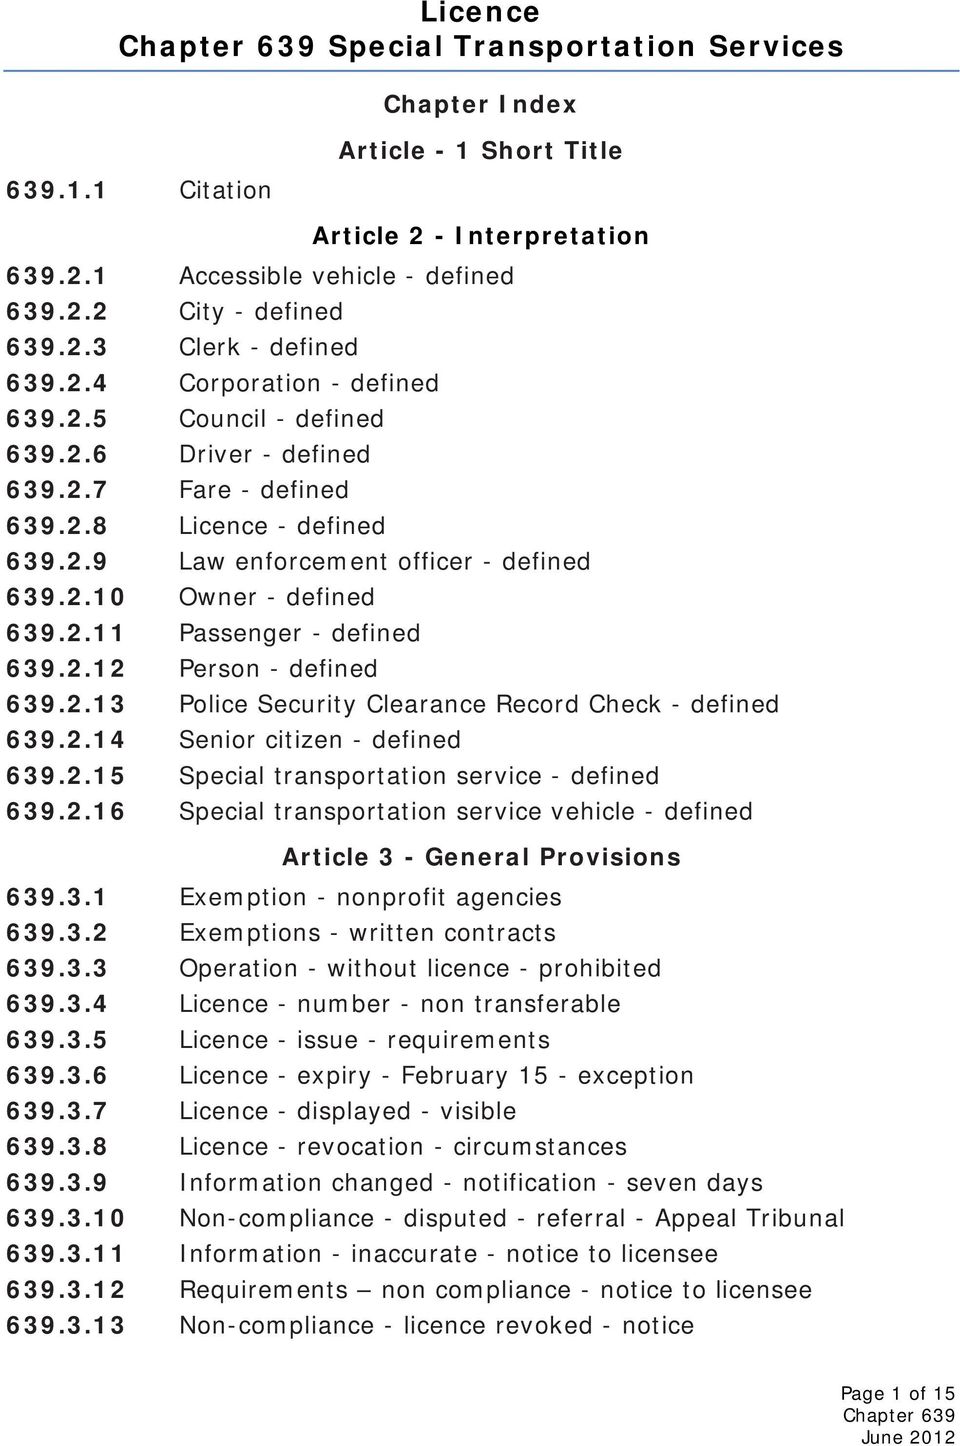 2.12 Person - defined 639.2.13 Police Security Clearance Record Check - defined 639.2.14 Senior citizen - defined 639.2.15 Special transportation service - defined 639.2.16 Special transportation service vehicle - defined Article 3 - General Provisions 639.